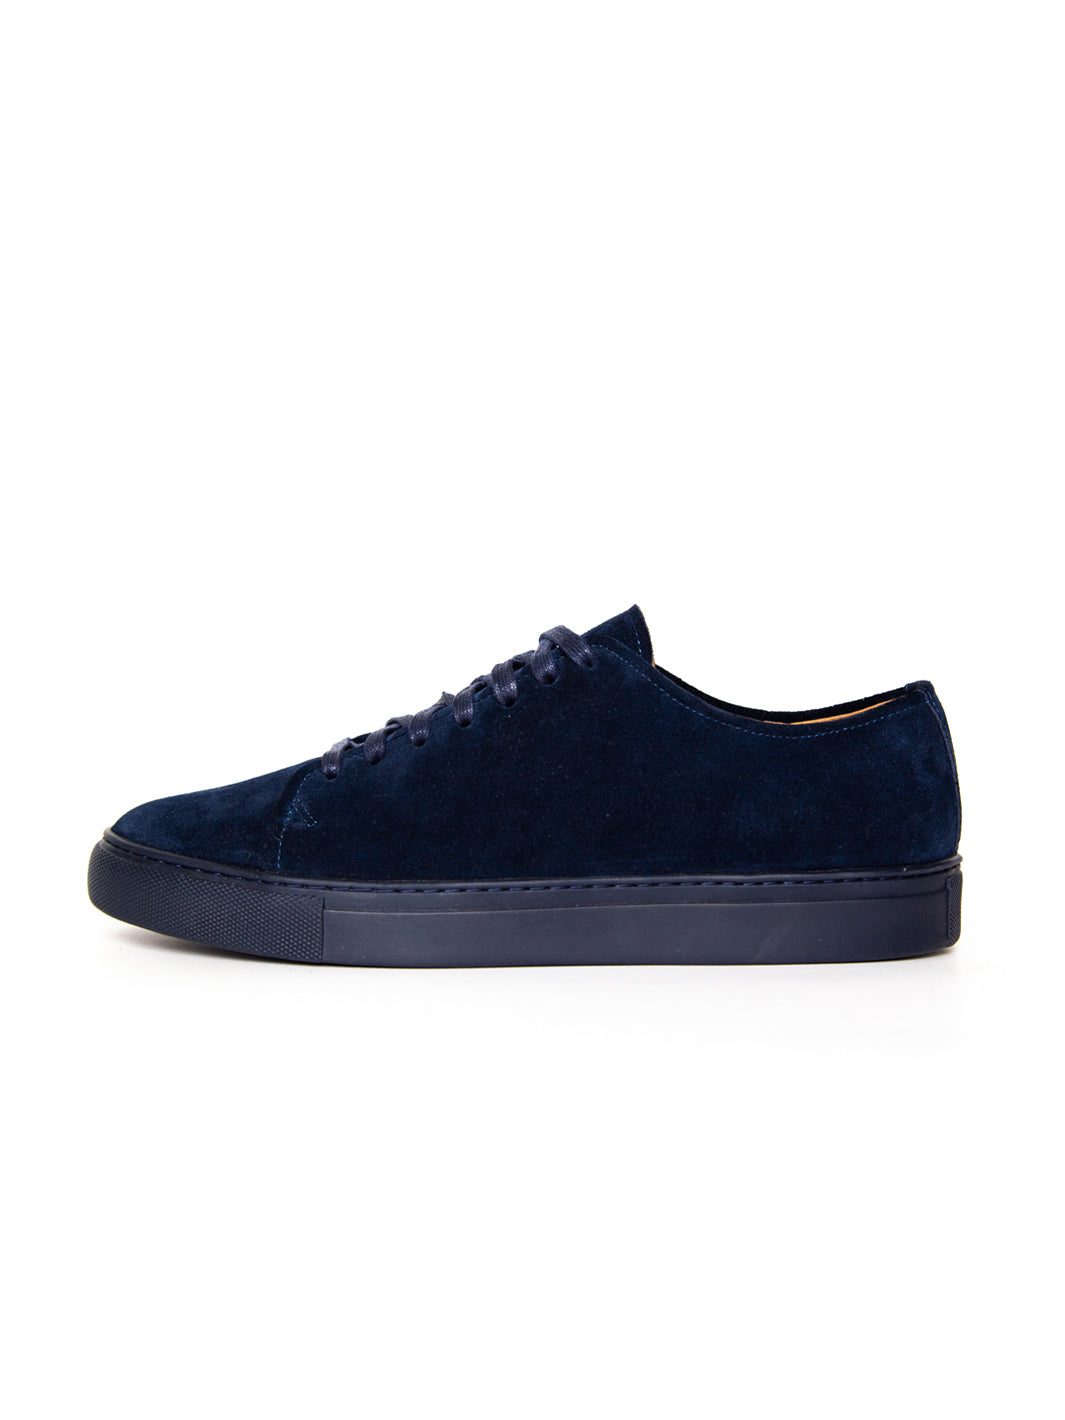 Navy suede leather low Asuwere sneakers